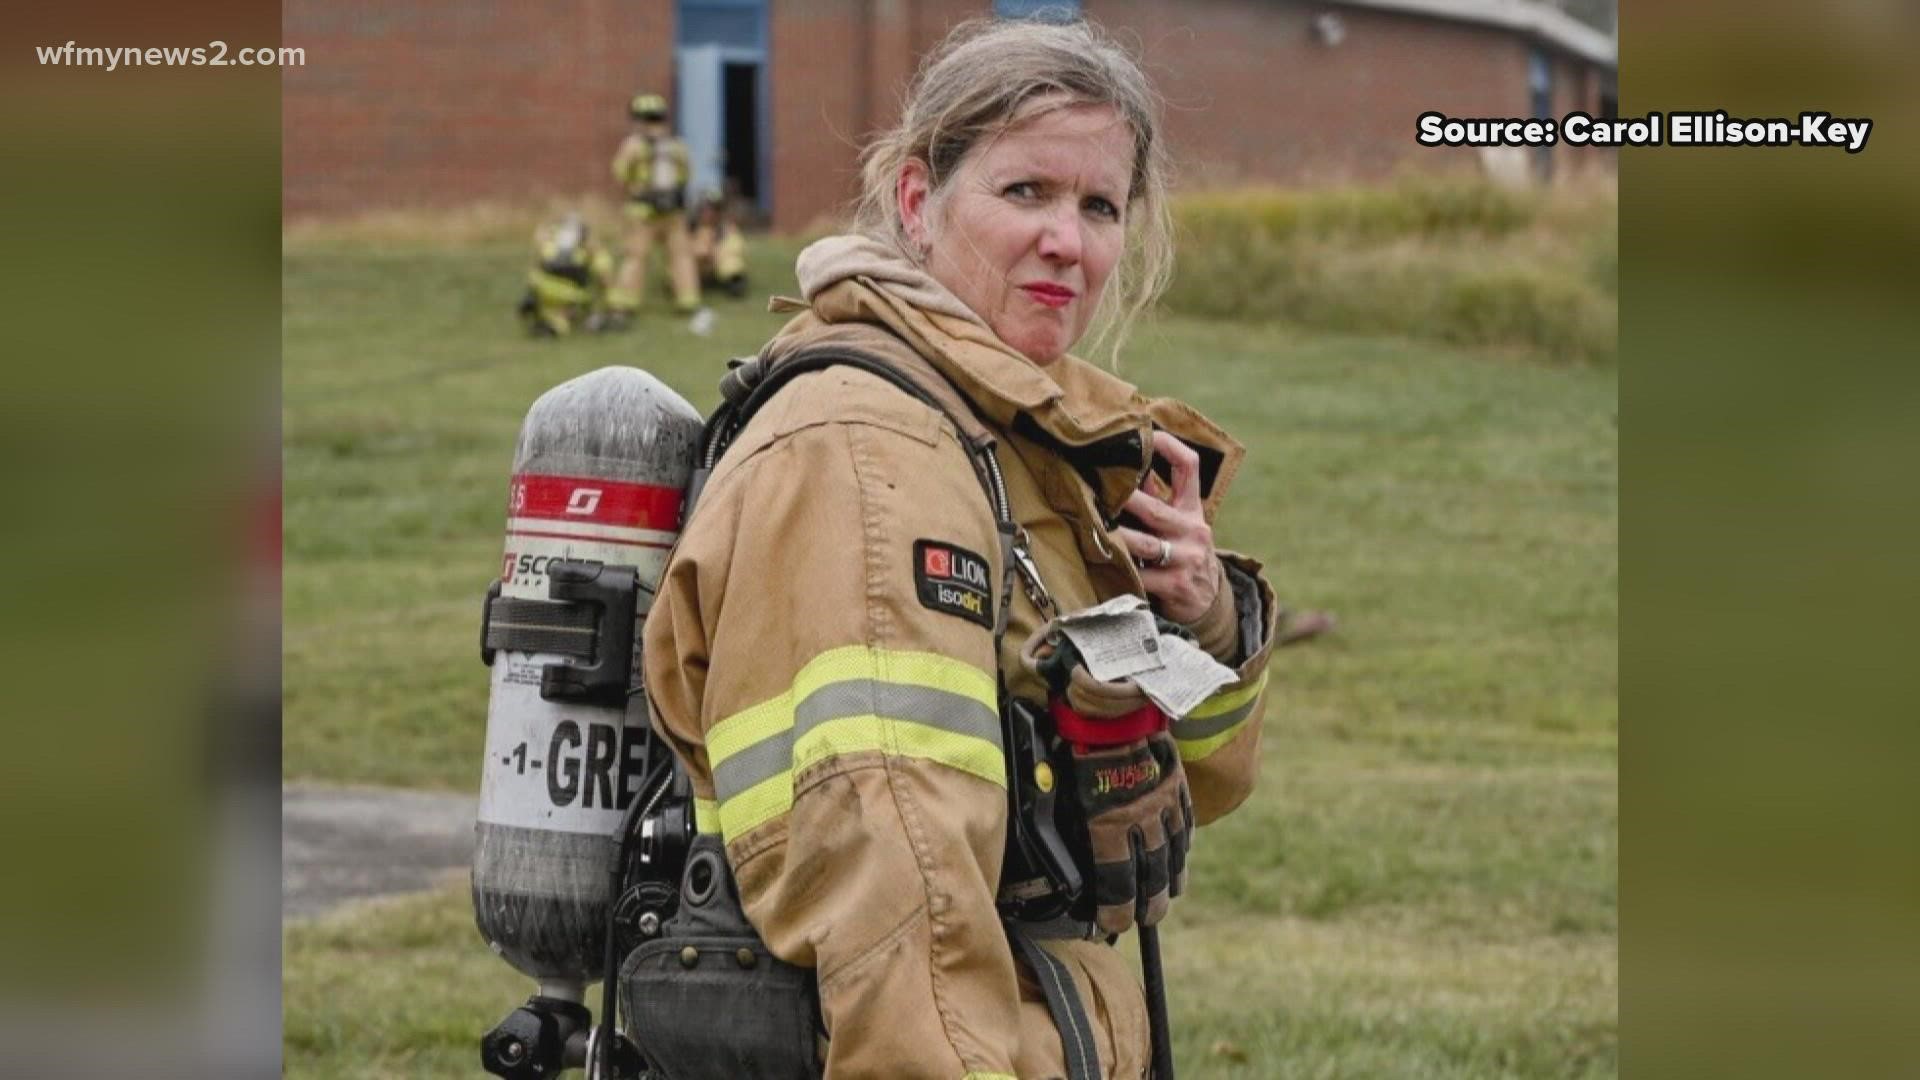 Carol Key is proud to be a part of the handful of women who not only fight fires but also lead the team as battalion chief.